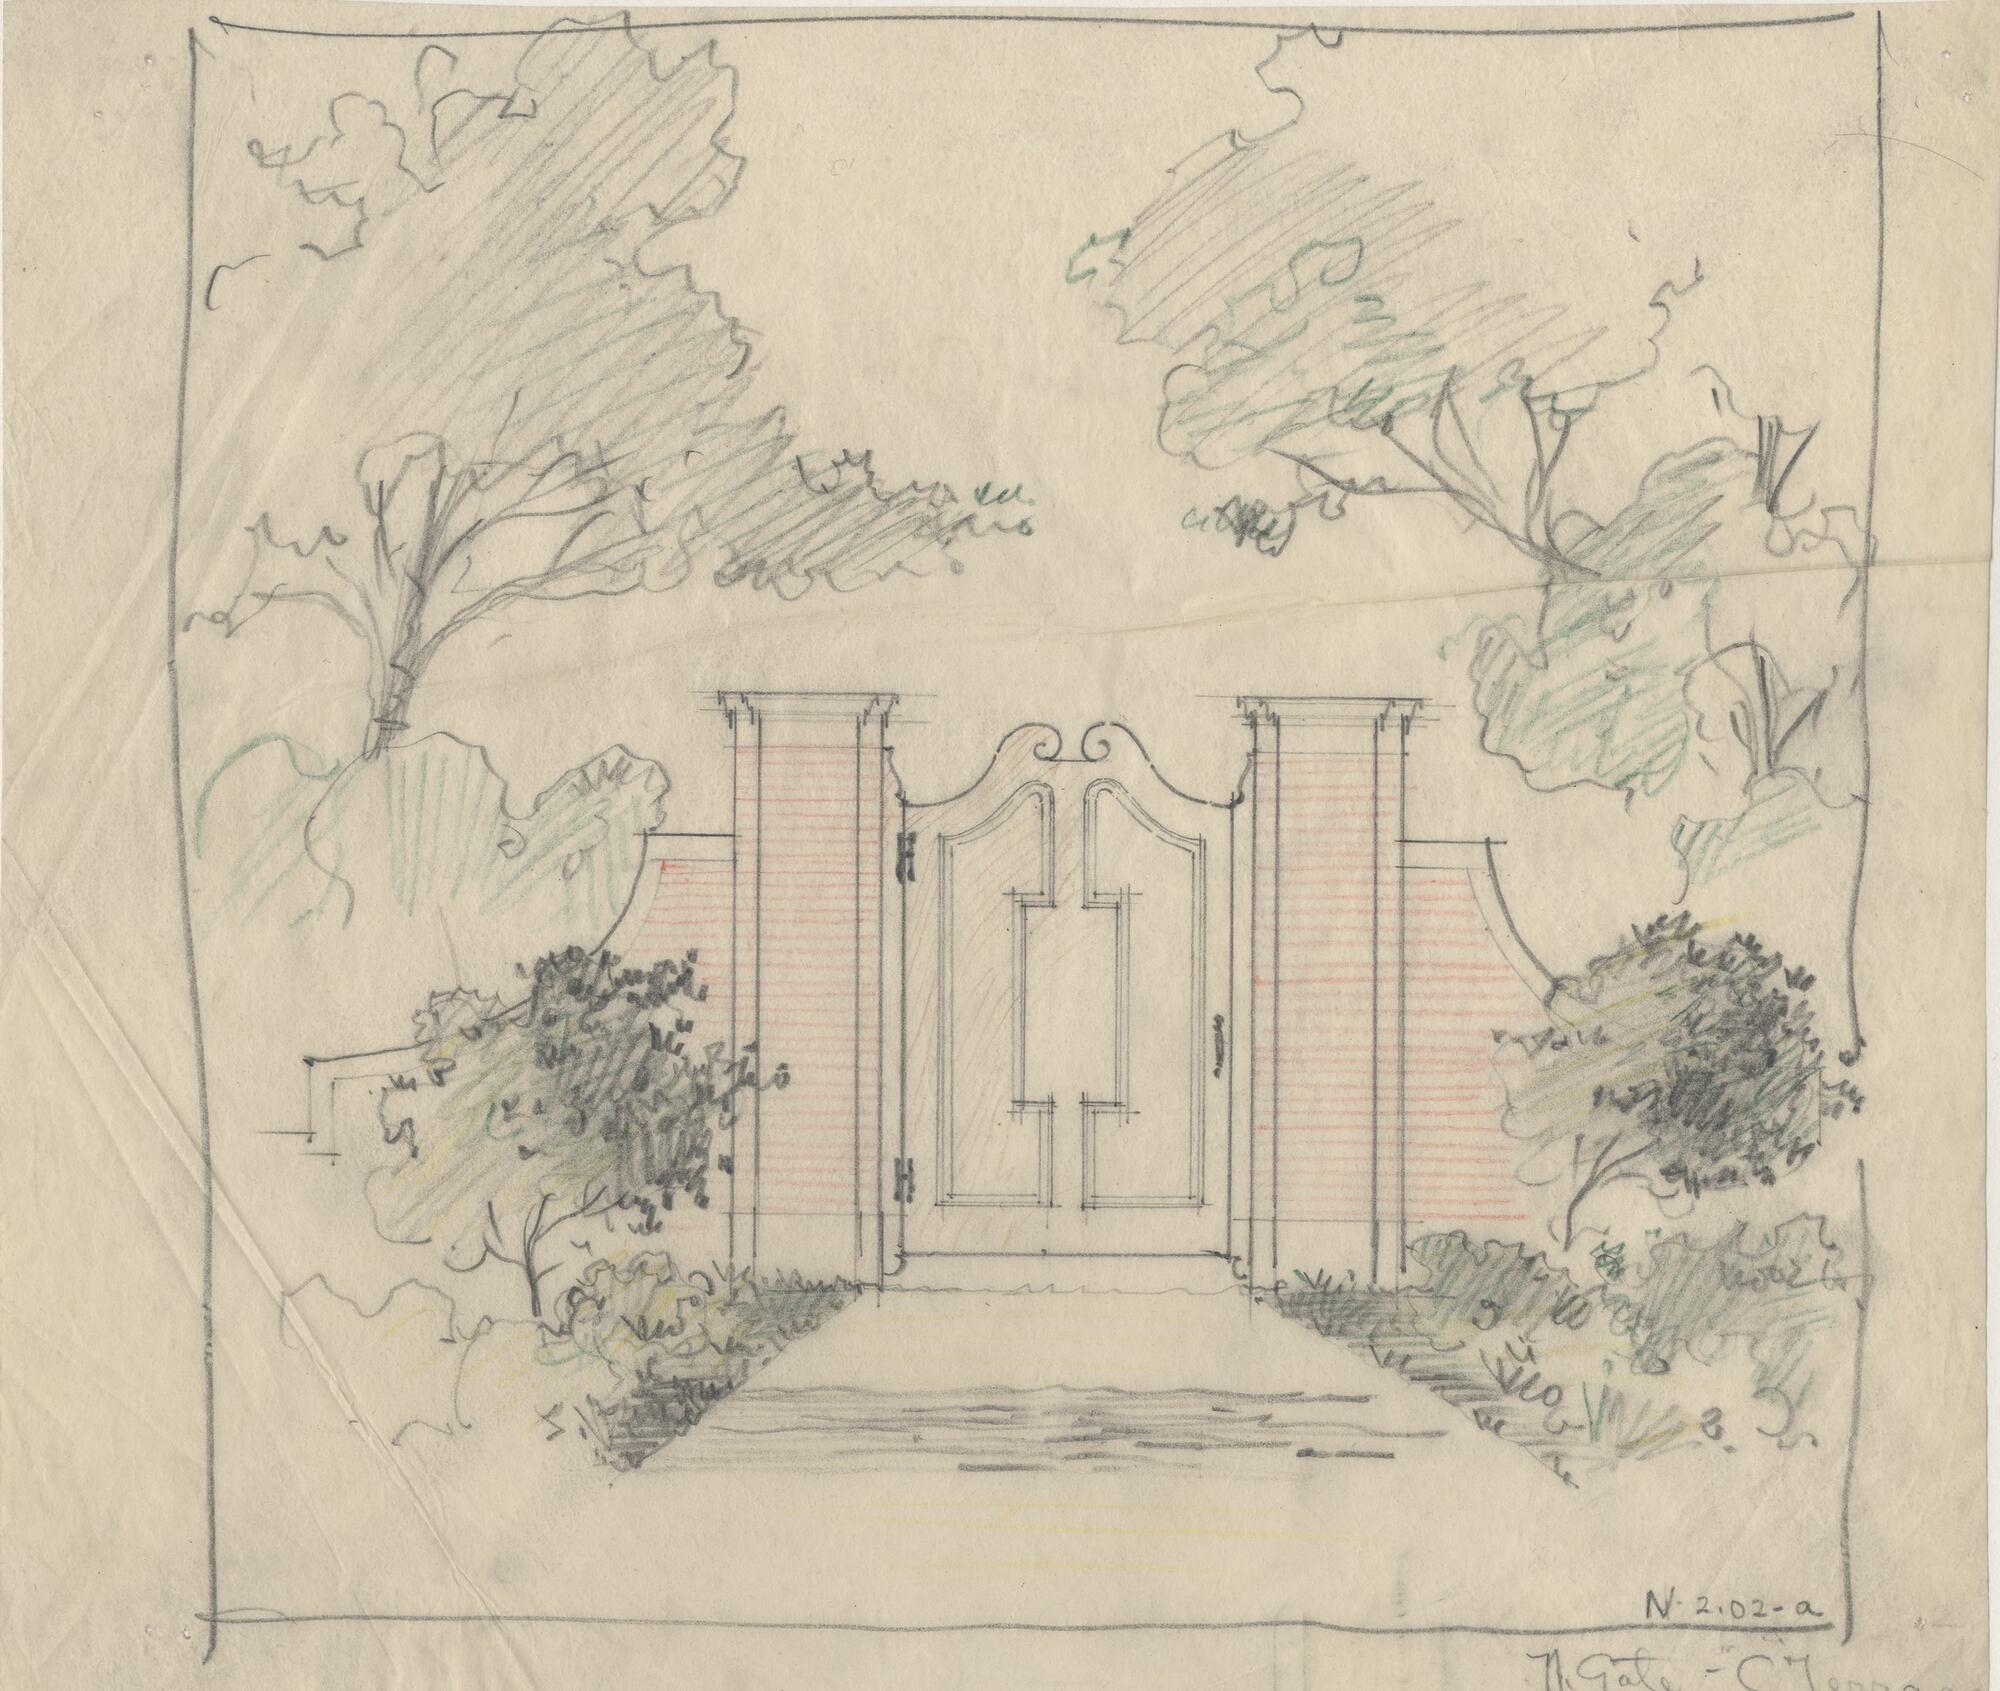 A pencil sketch of a possible design for the rose garden gate